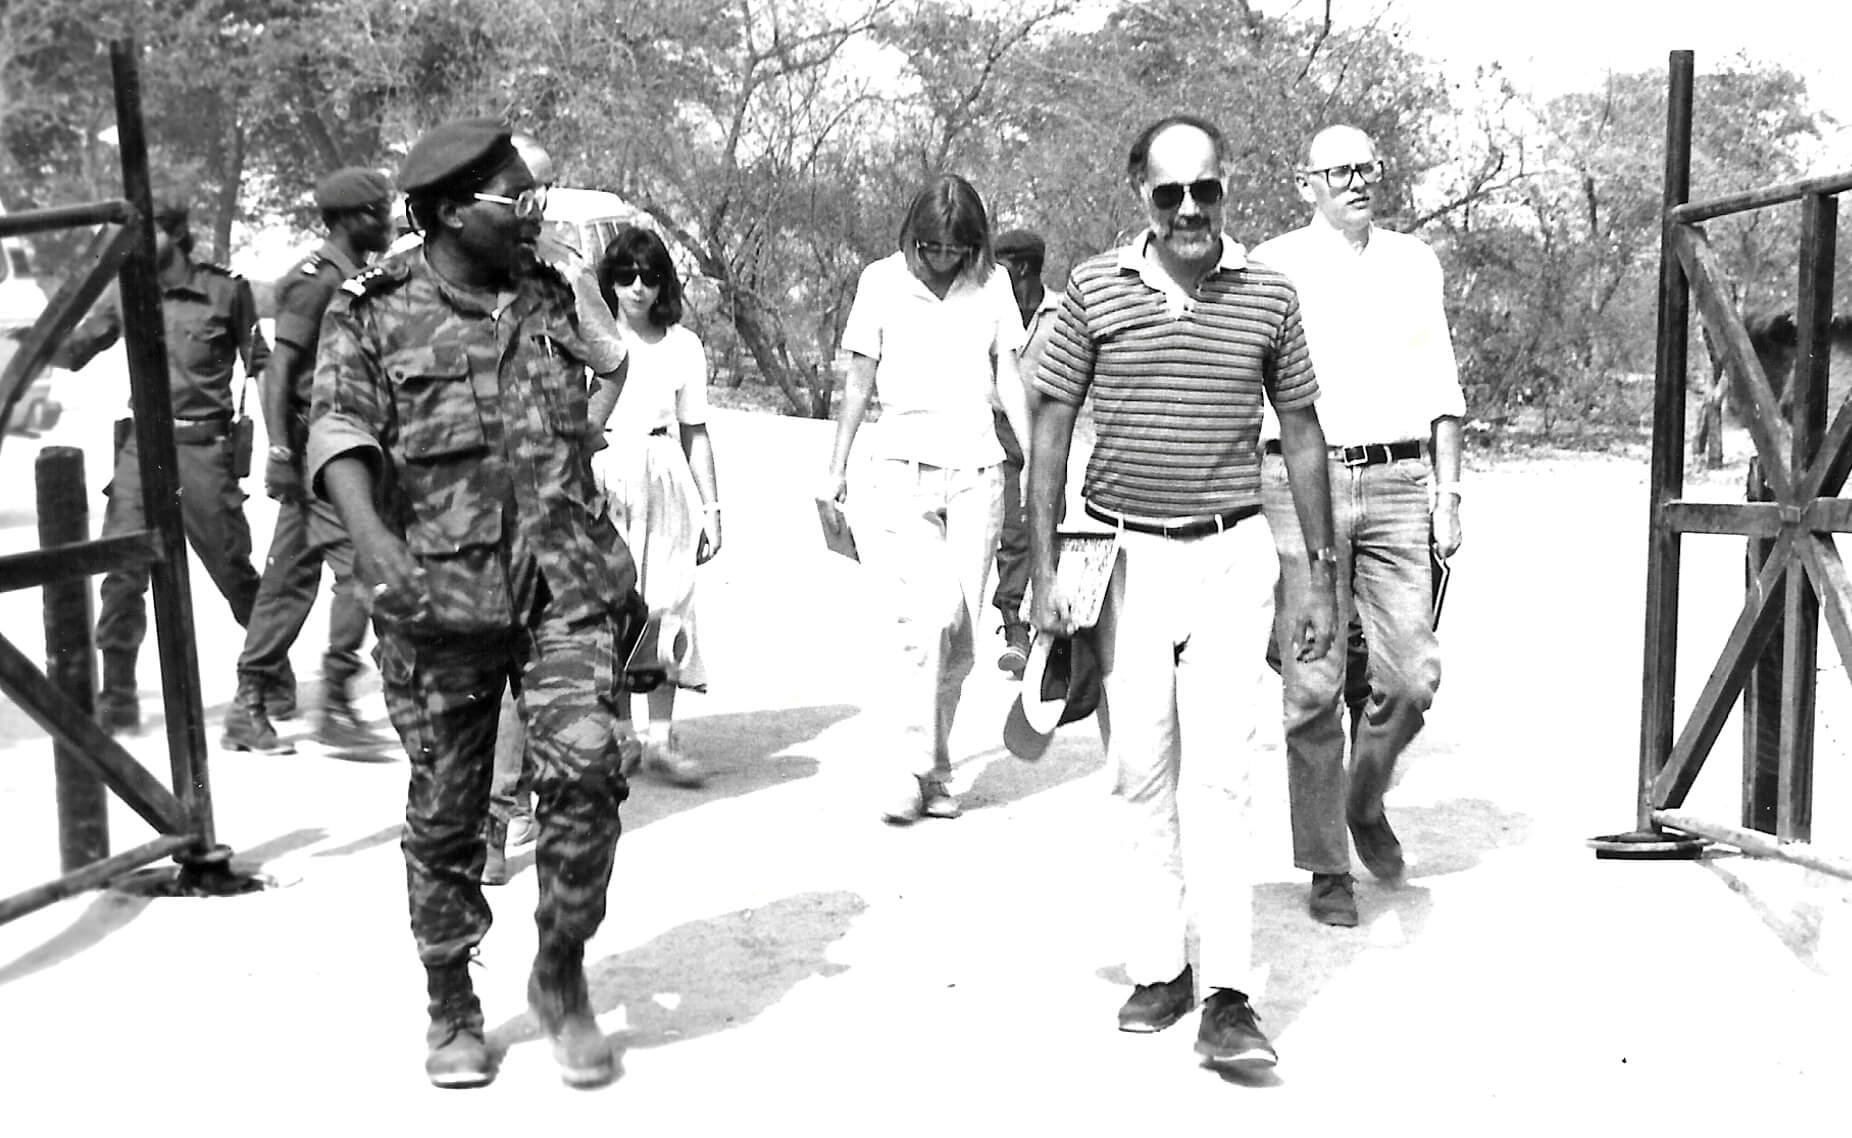 The Angola assessment team in Jamba, walking with Jonas Savimbi’s chief of staff toward the underground bunker office where they would meet with Savimbi. Garvelink is to the far right and Aossey is to the far left.